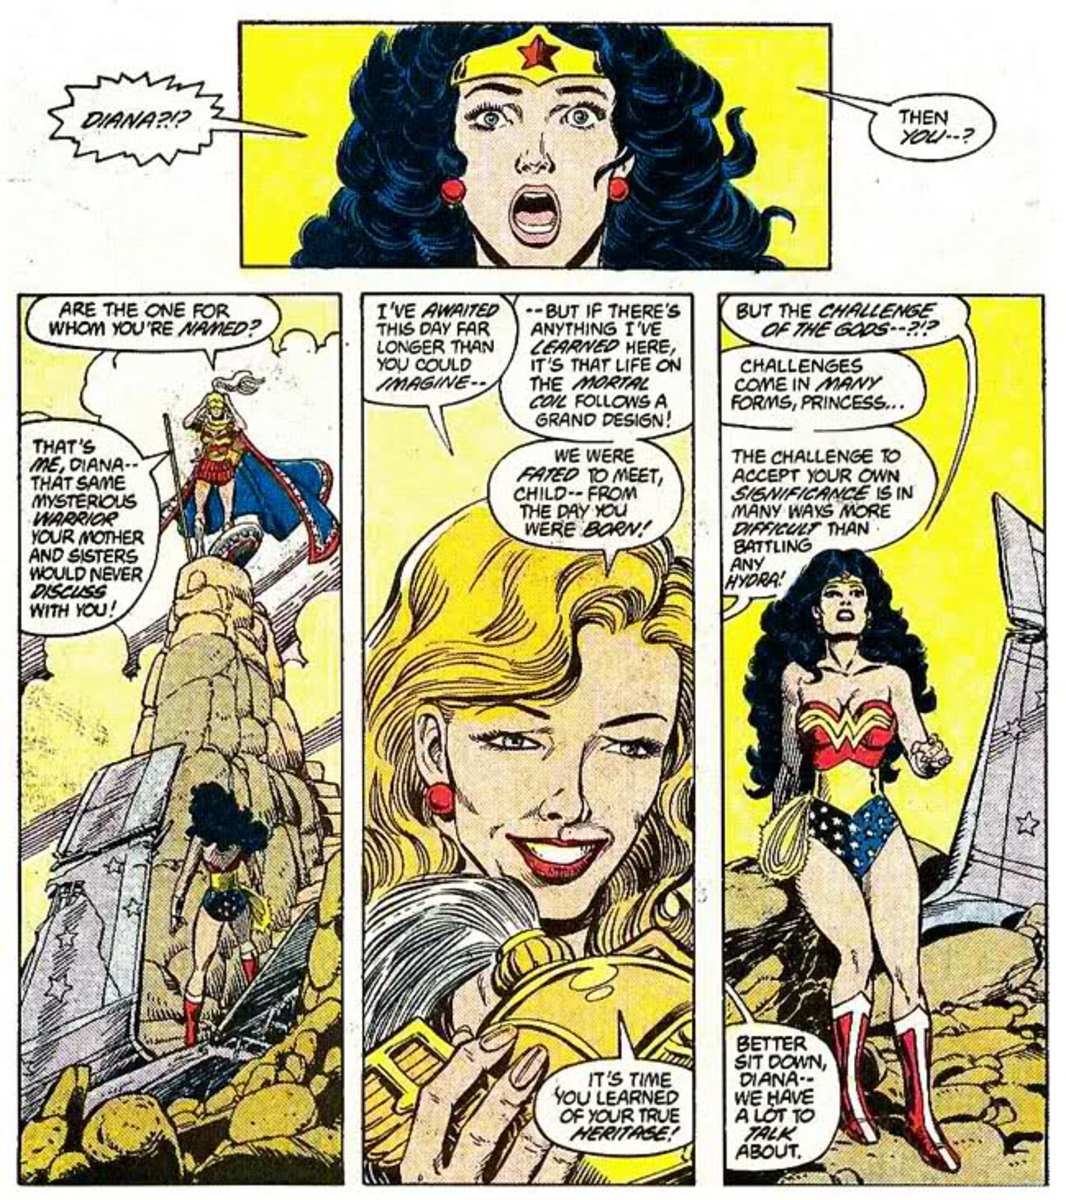 Diana meets Diana Trevor in issue #12.